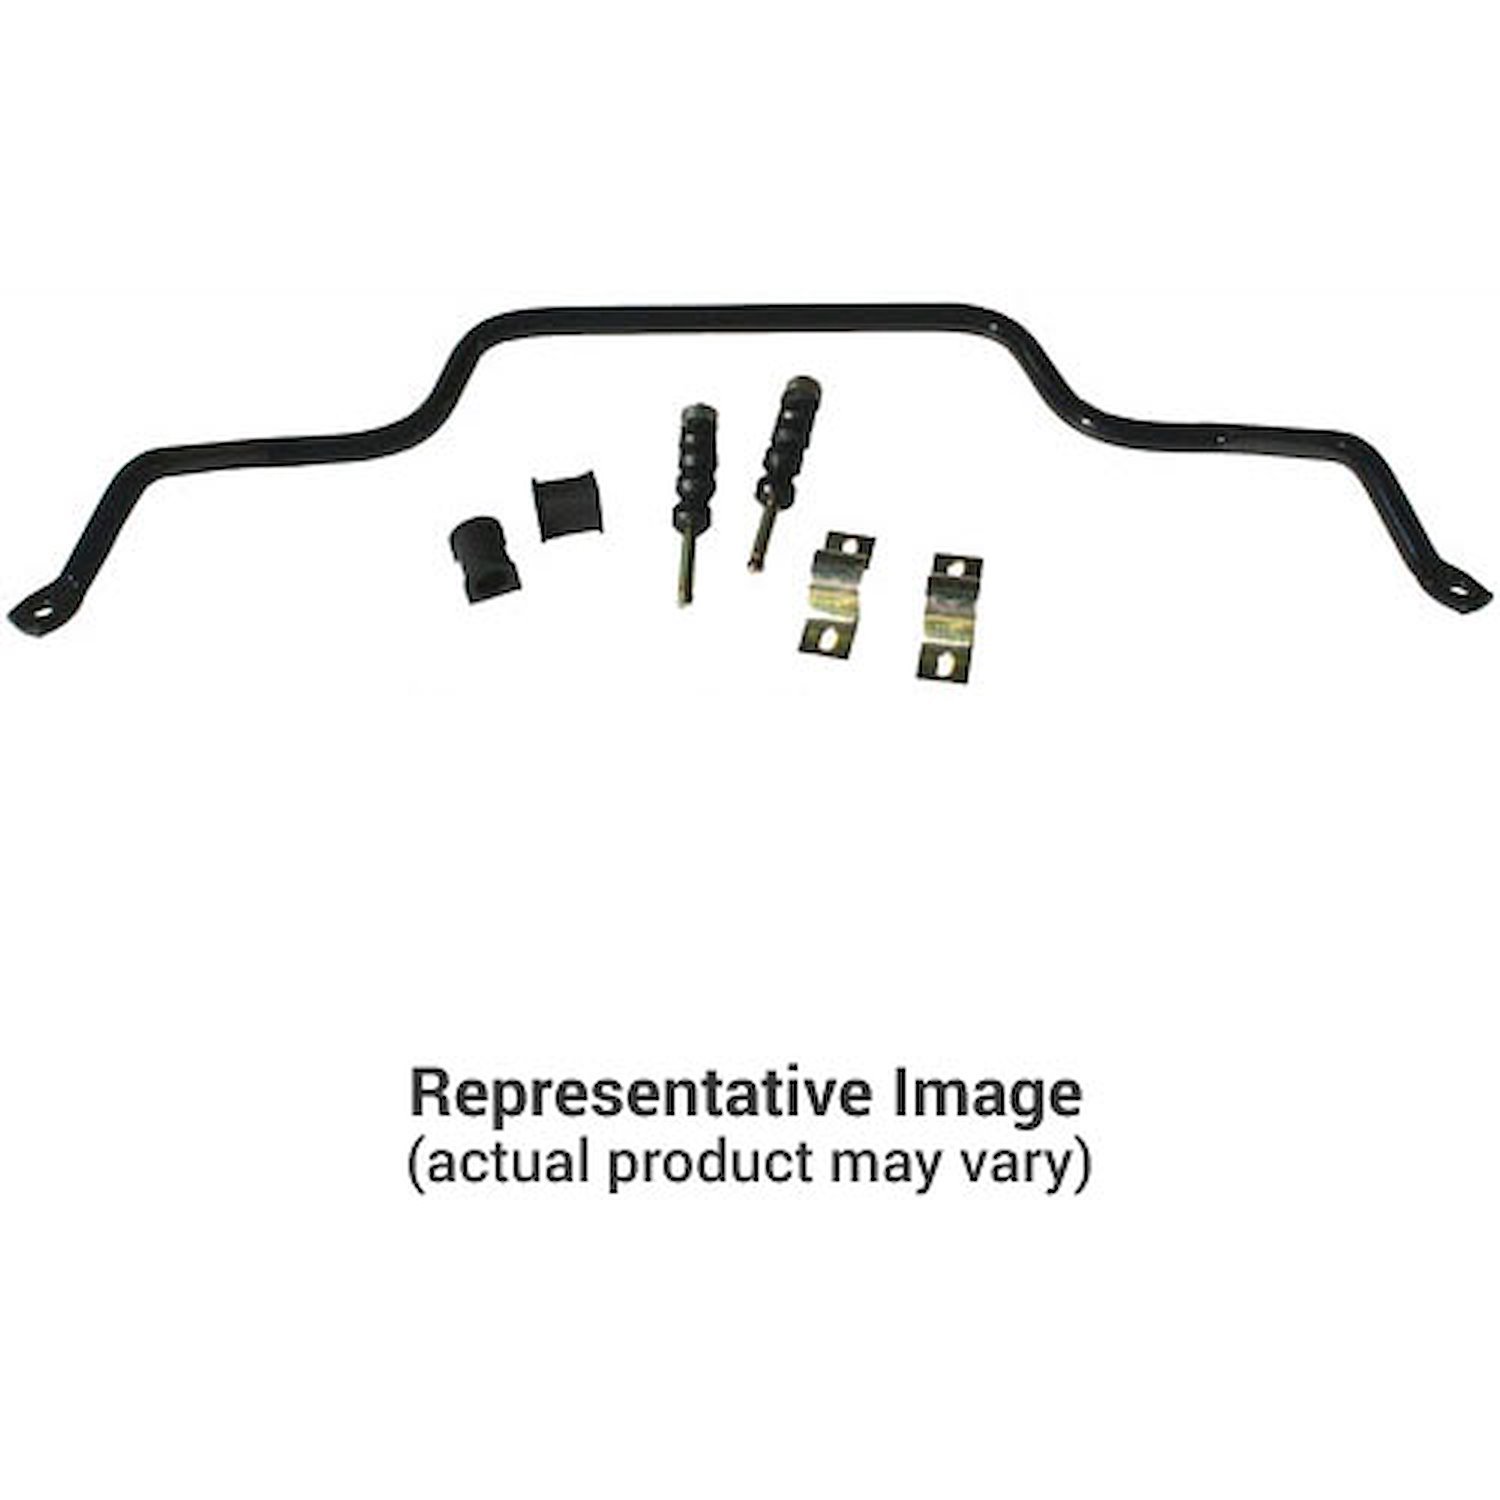 1" Front Sway Bar 1995-98 Cavalier and Corsica